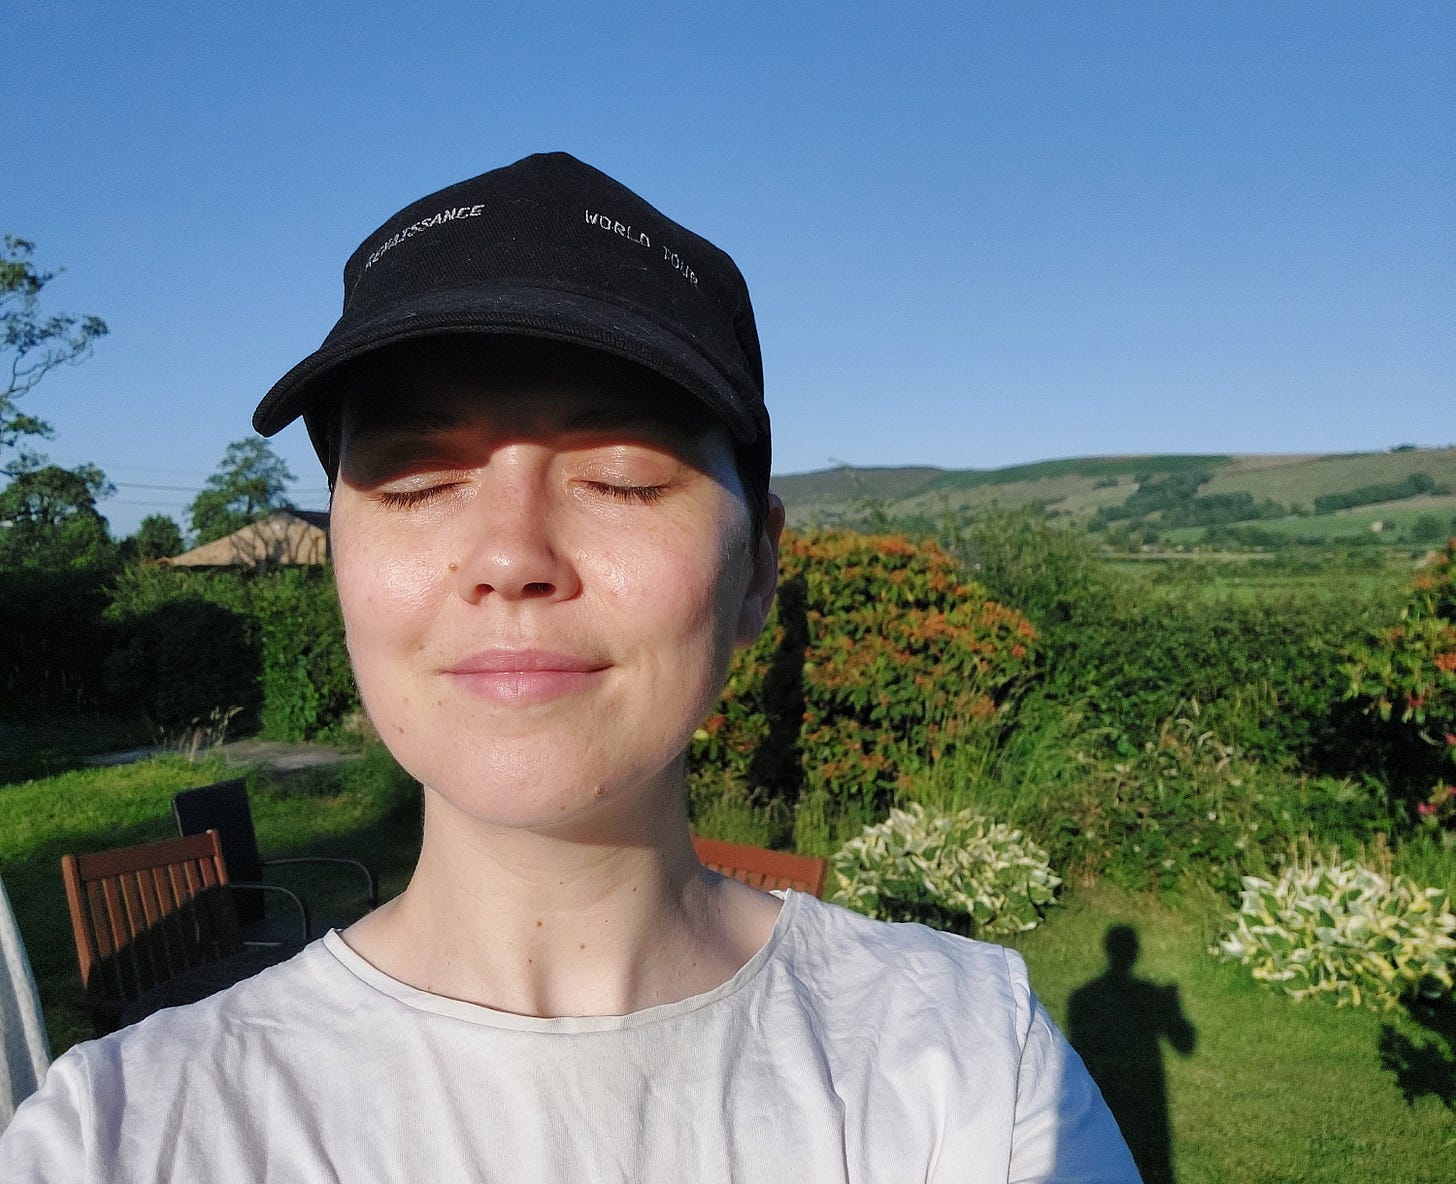 Head and shoulders of Janelle (white woman wearing a black cap) with her eyes closed and the sun shining on her face. Behind her blue sky and green rolling fields